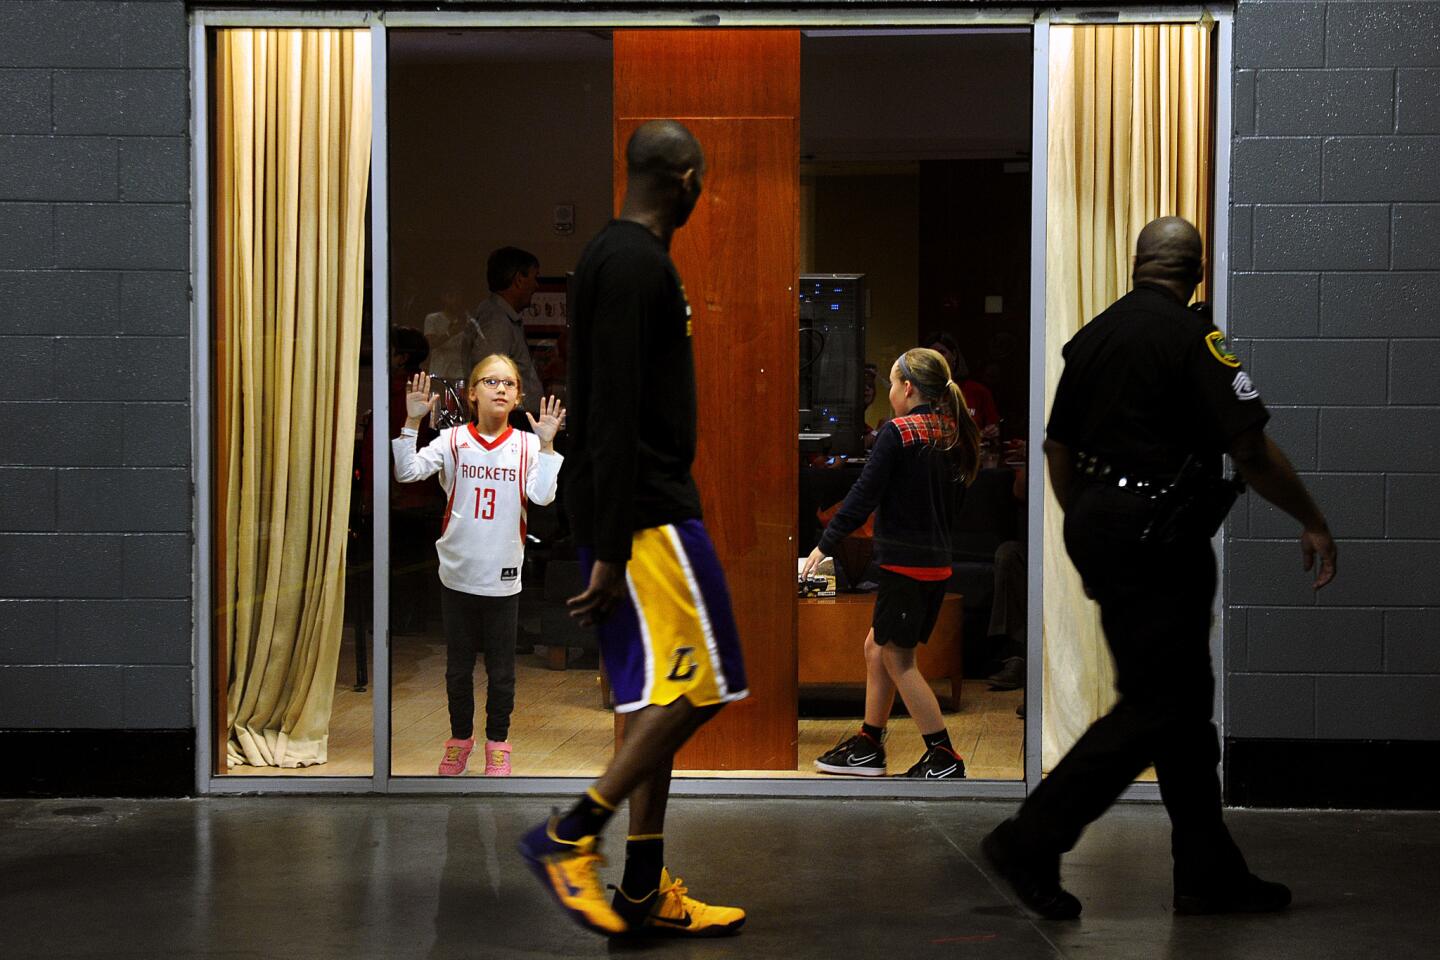 Laker Kobe Bryant walks by a young Rockets fan as he makes his way to the court during halftime in Houston.